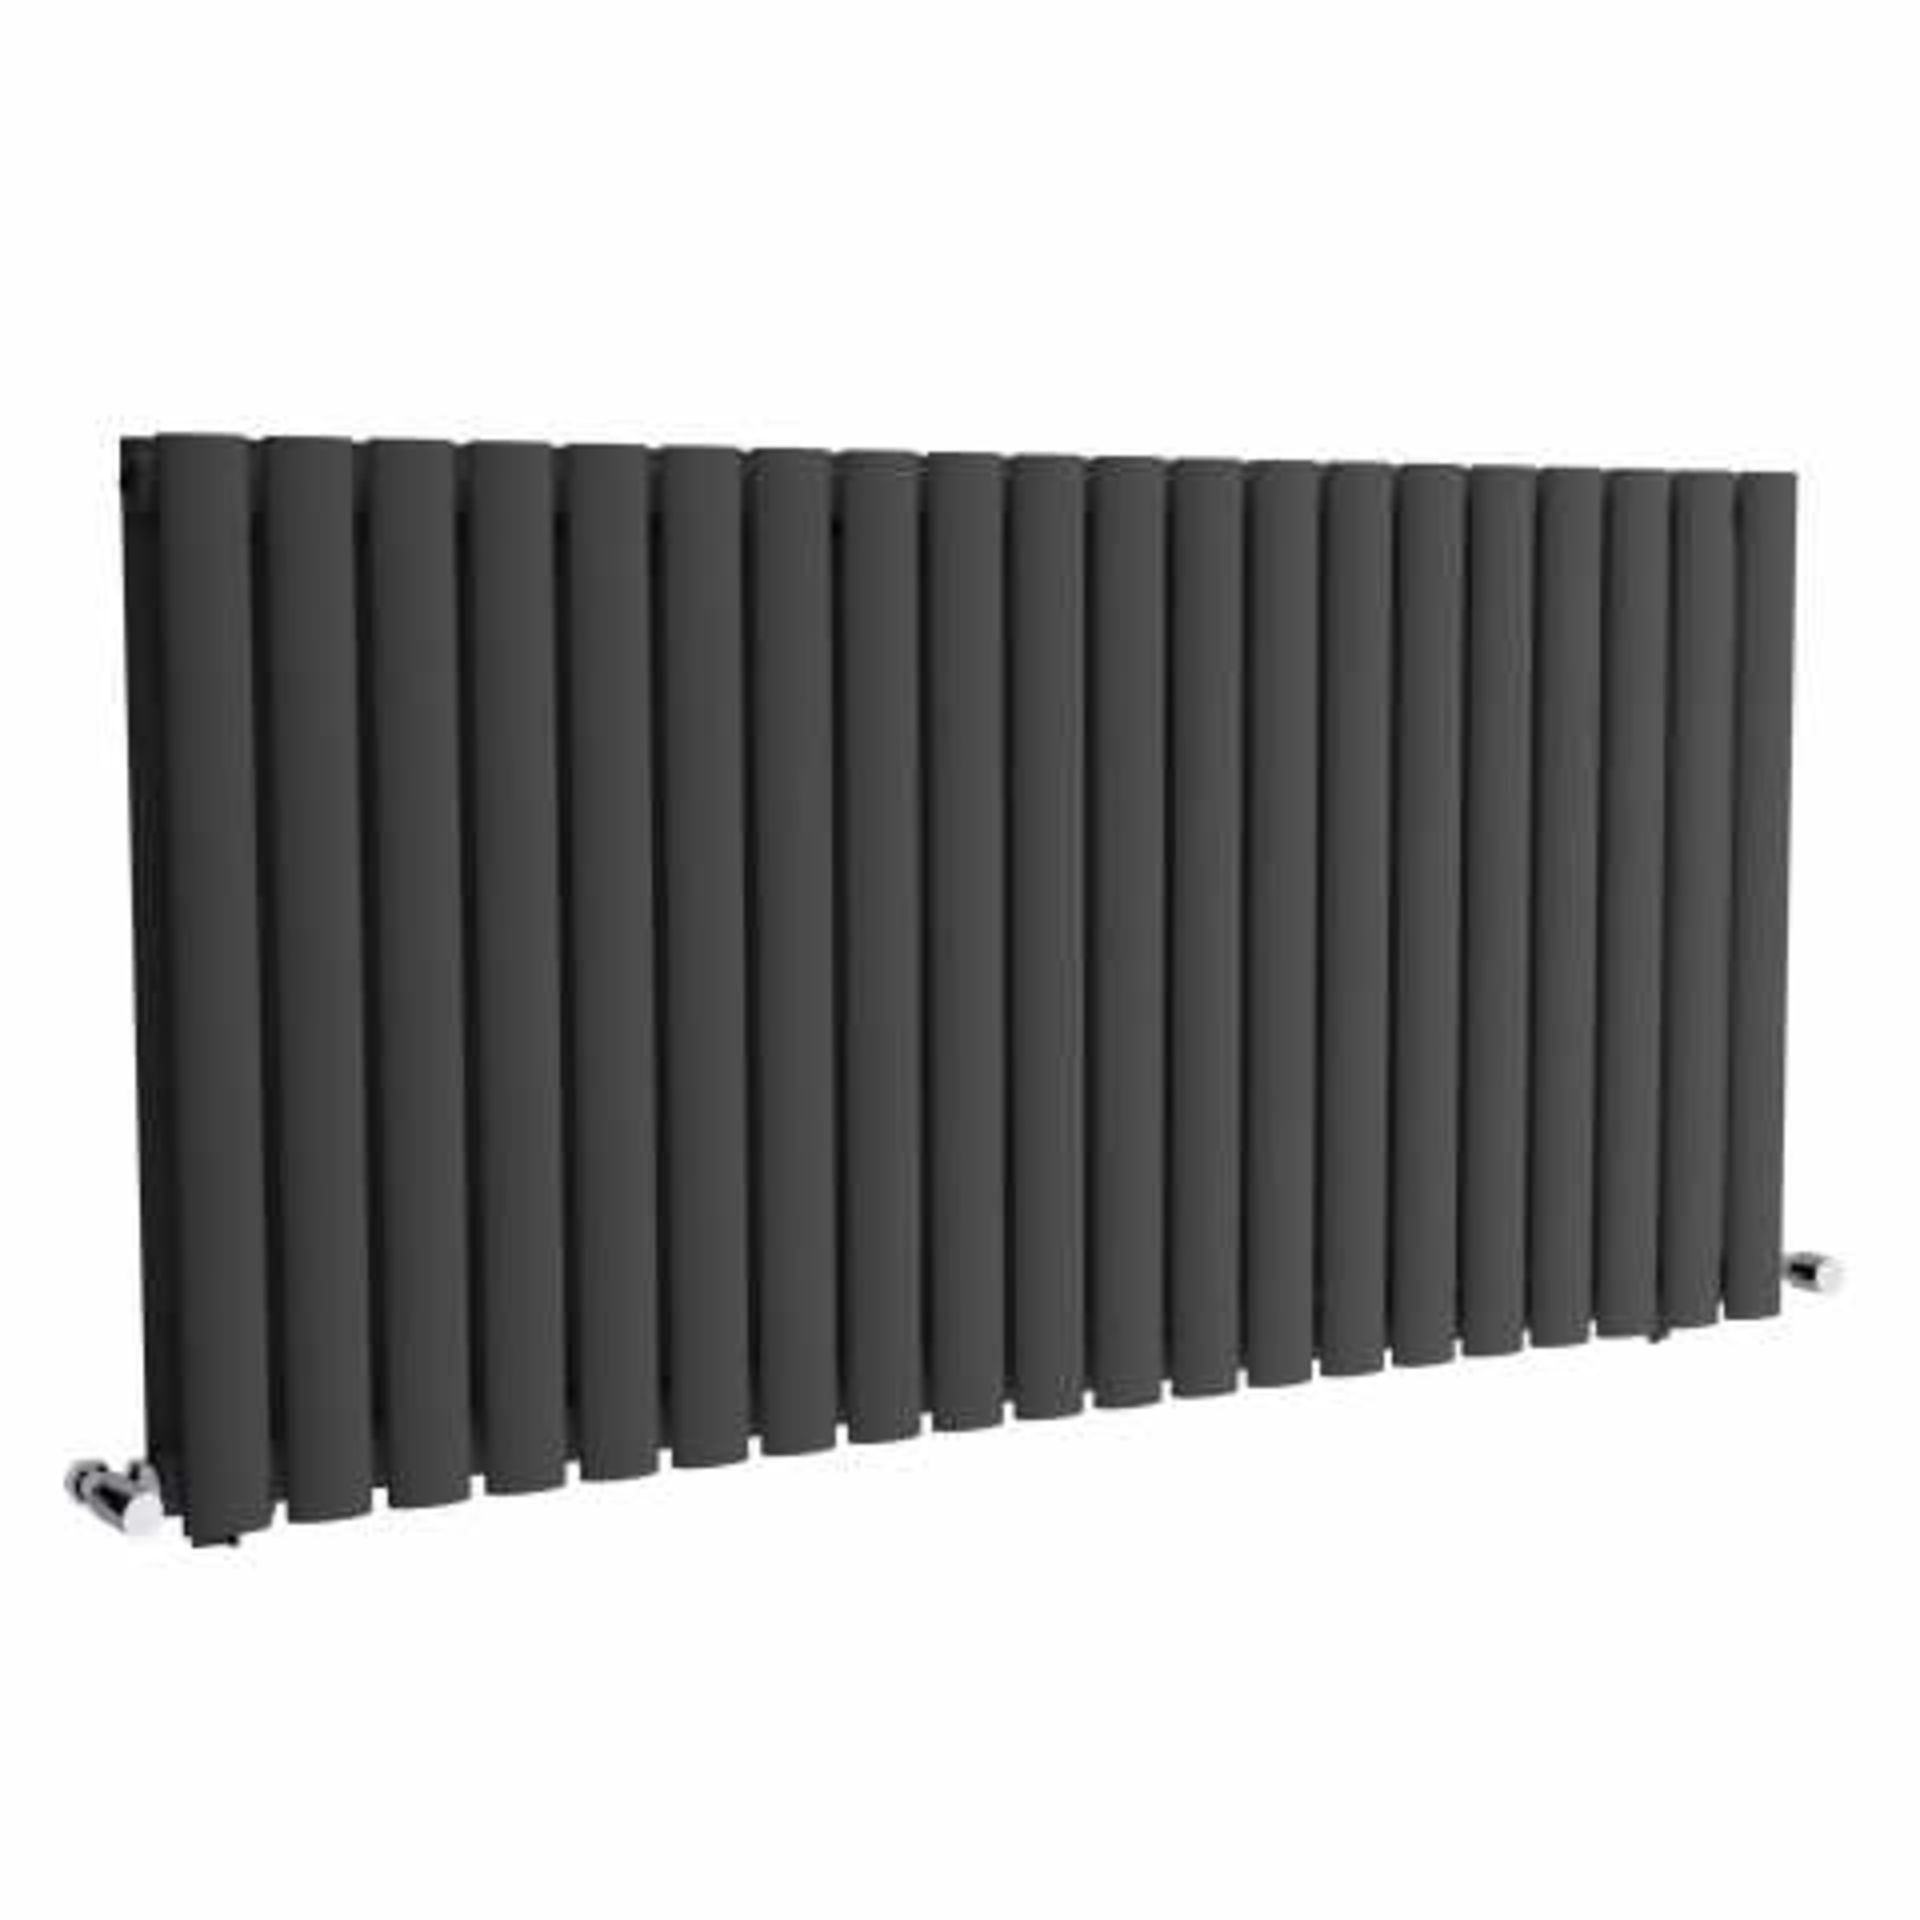 (A9) 600x1200mm Anthracite Double Panel Oval Tube Horizontal Radiator - Huntington Finest. RRP £ - Image 2 of 5